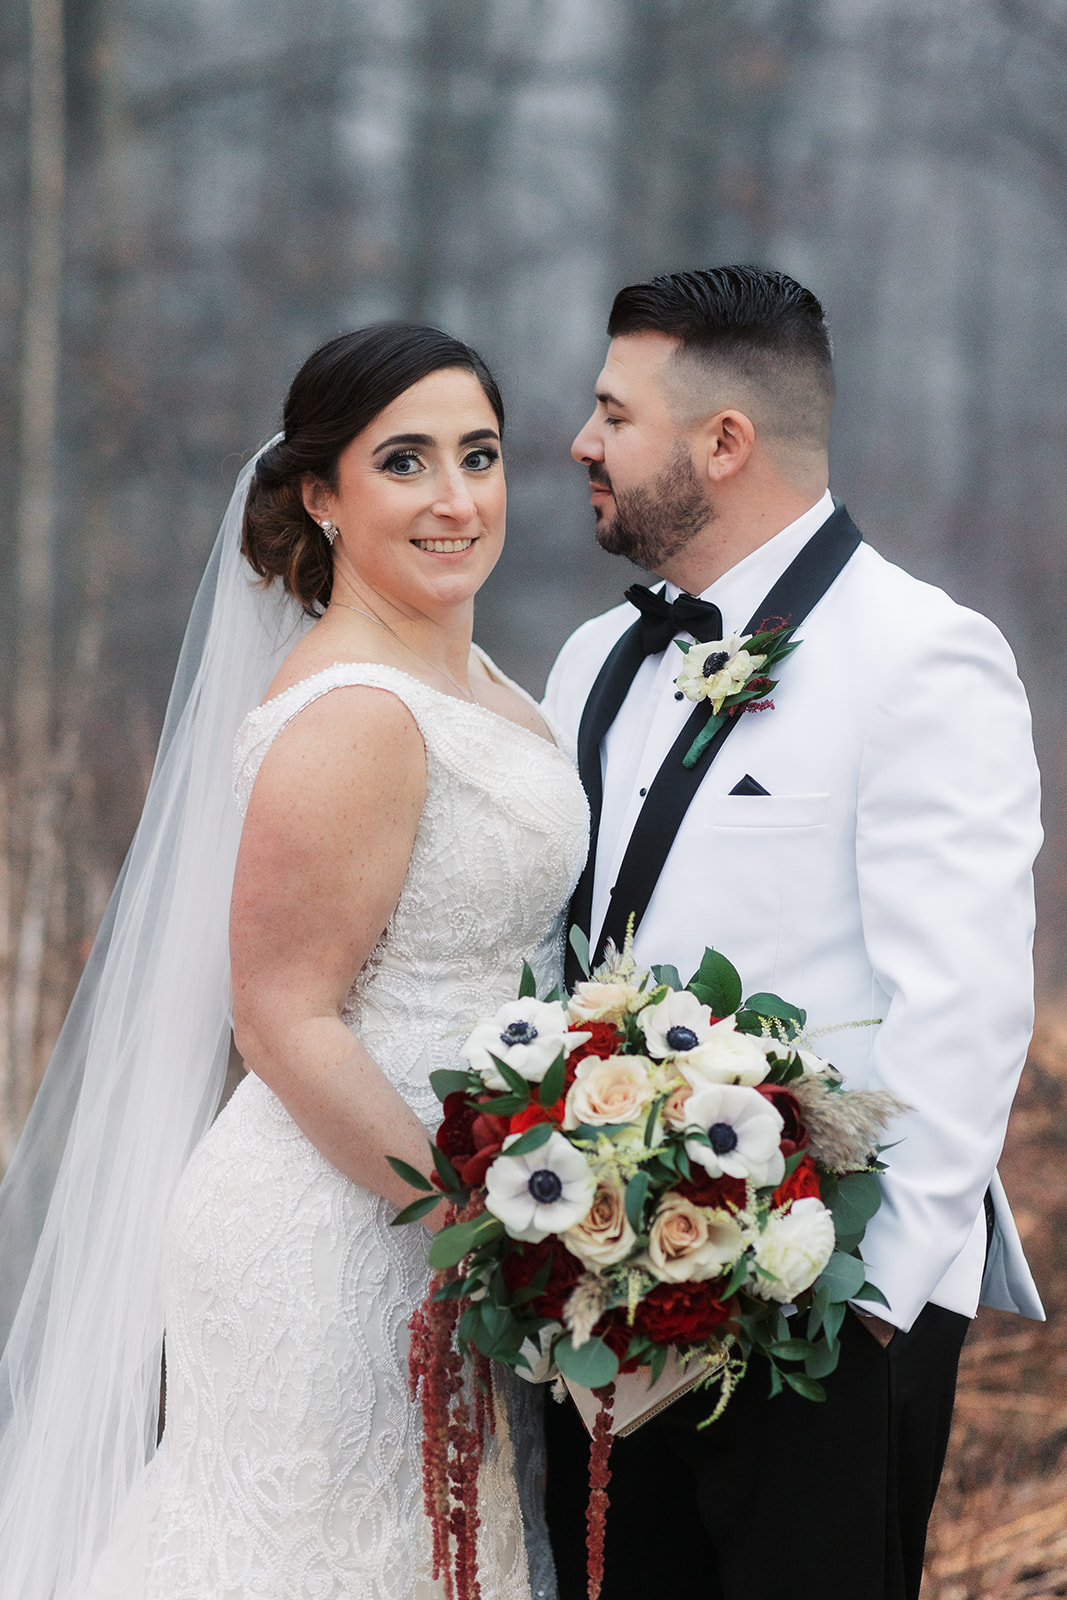 Newlyweds stand together outside in a lace dress and white/black tuxedo at their Above Weddings